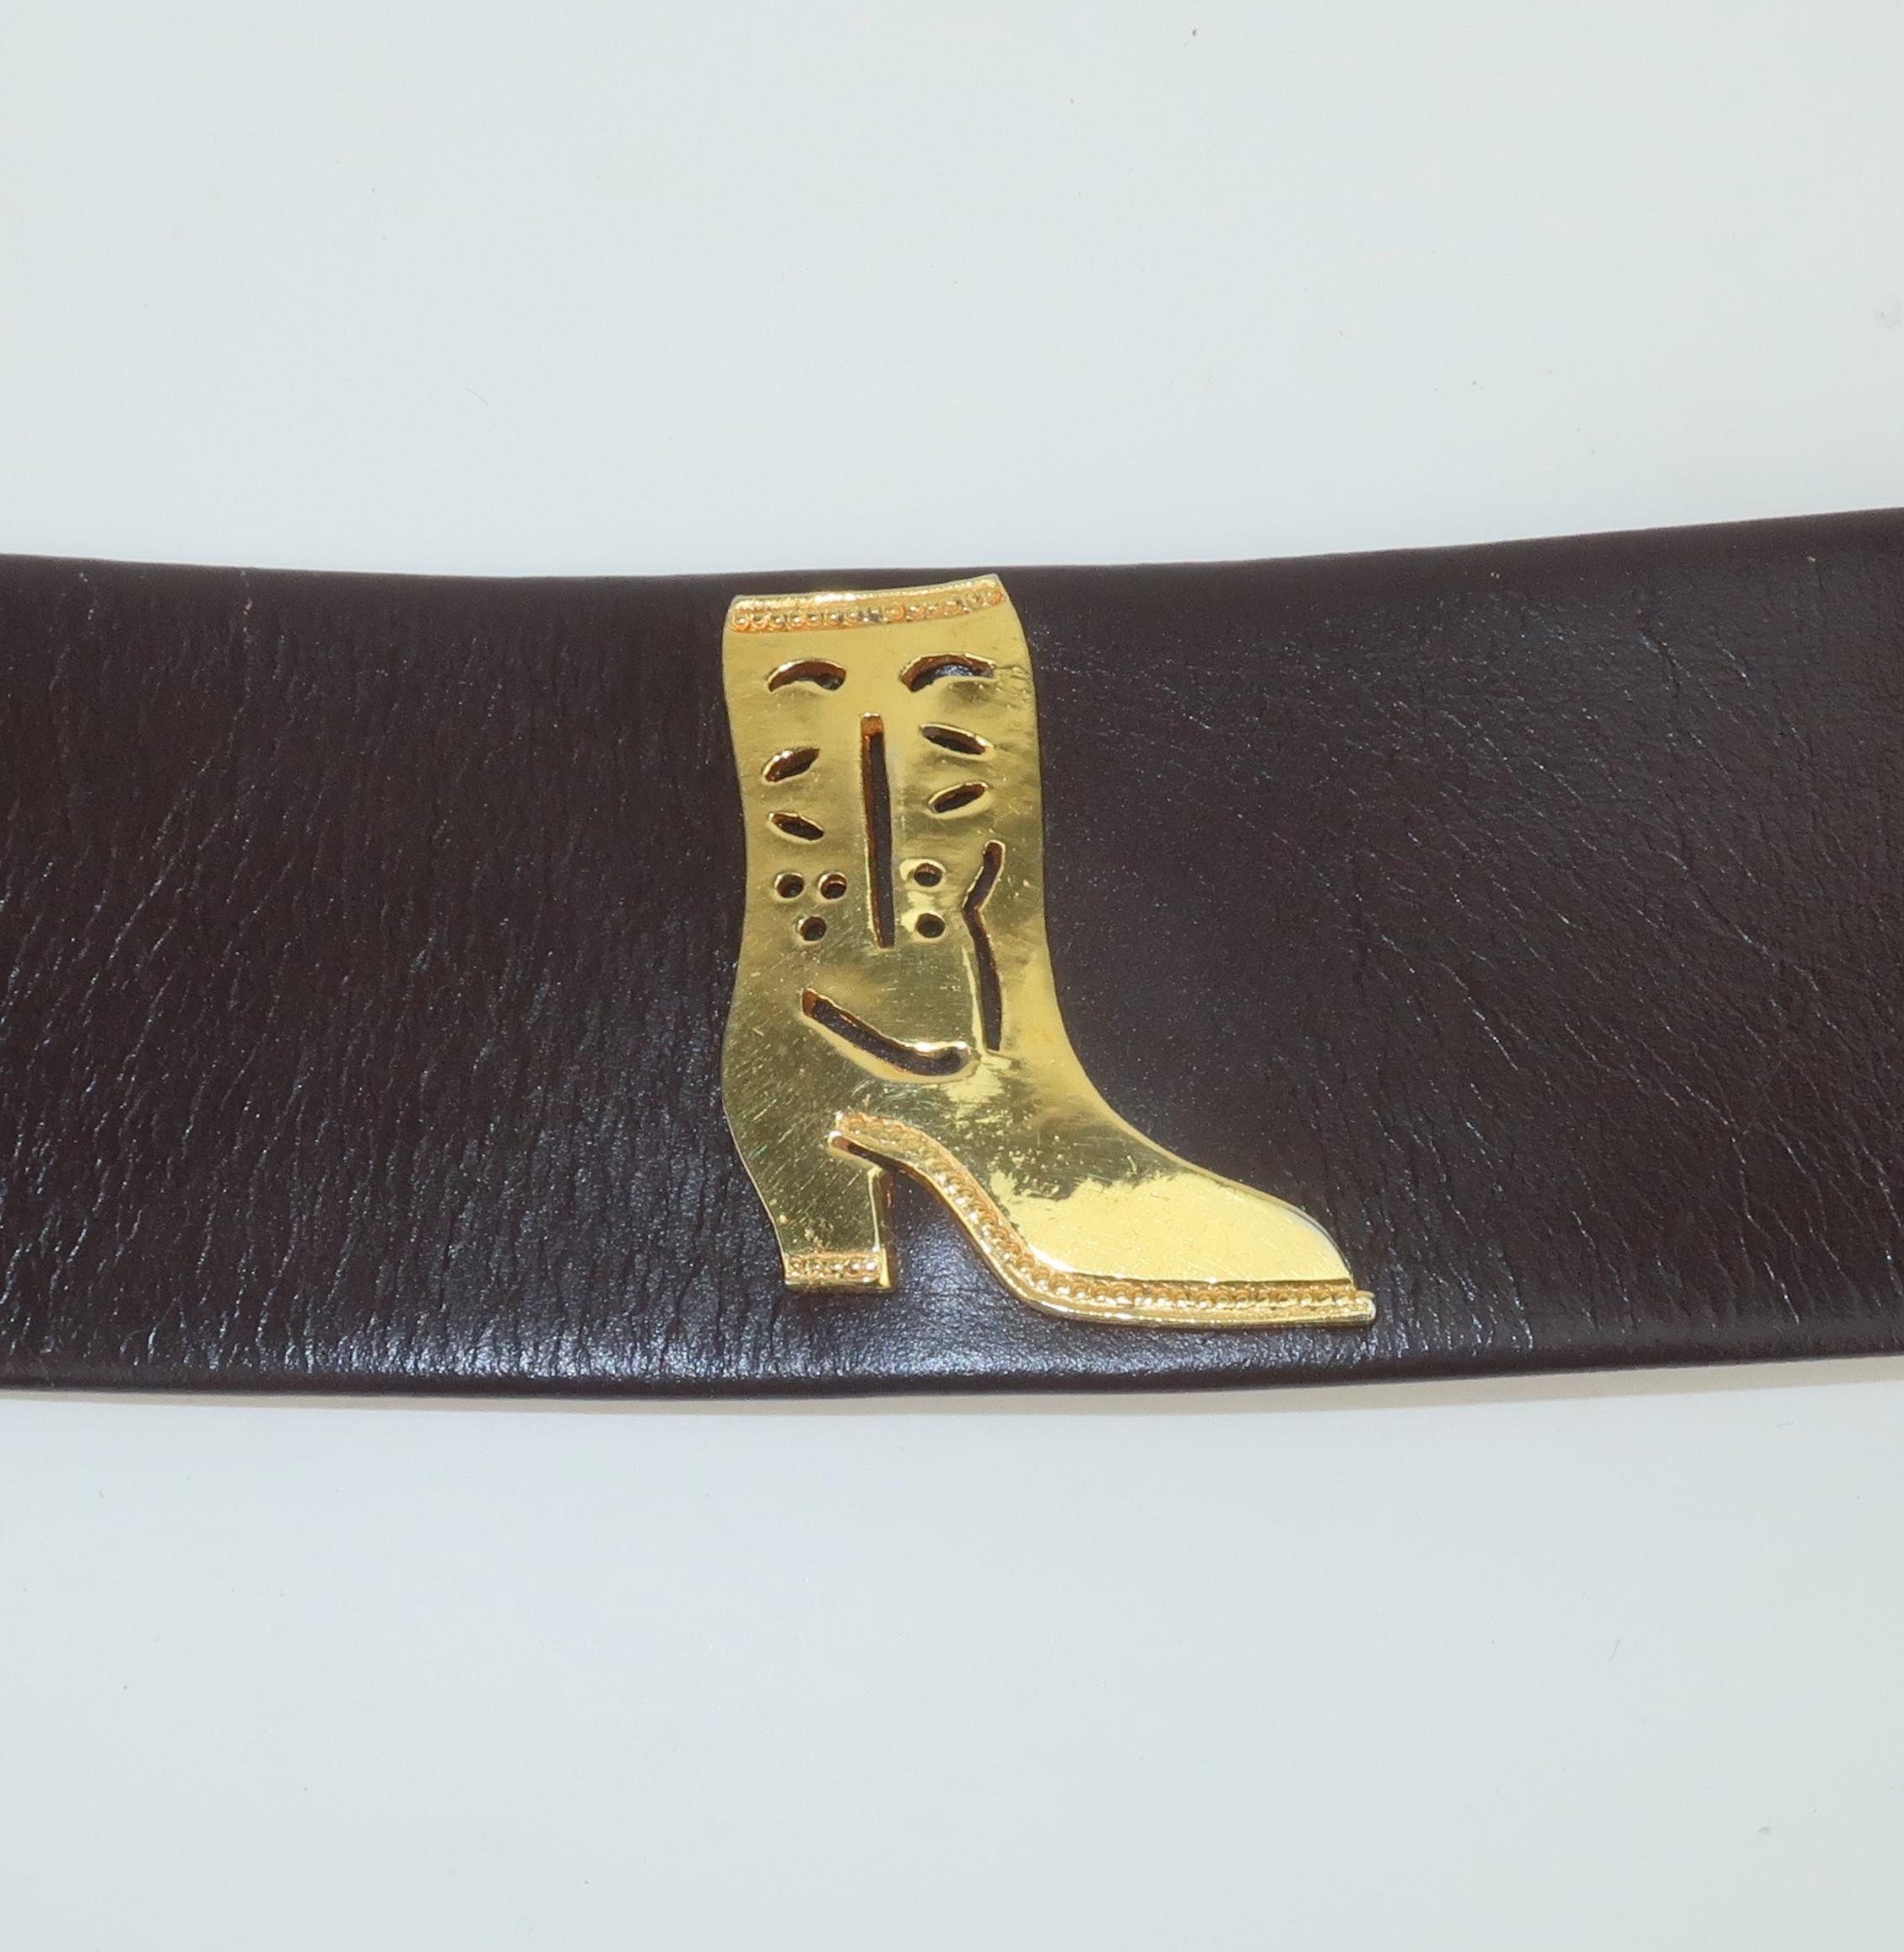 Neiman Marcus Texas Novelty Brown Leather Belt, 1960's For Sale 3